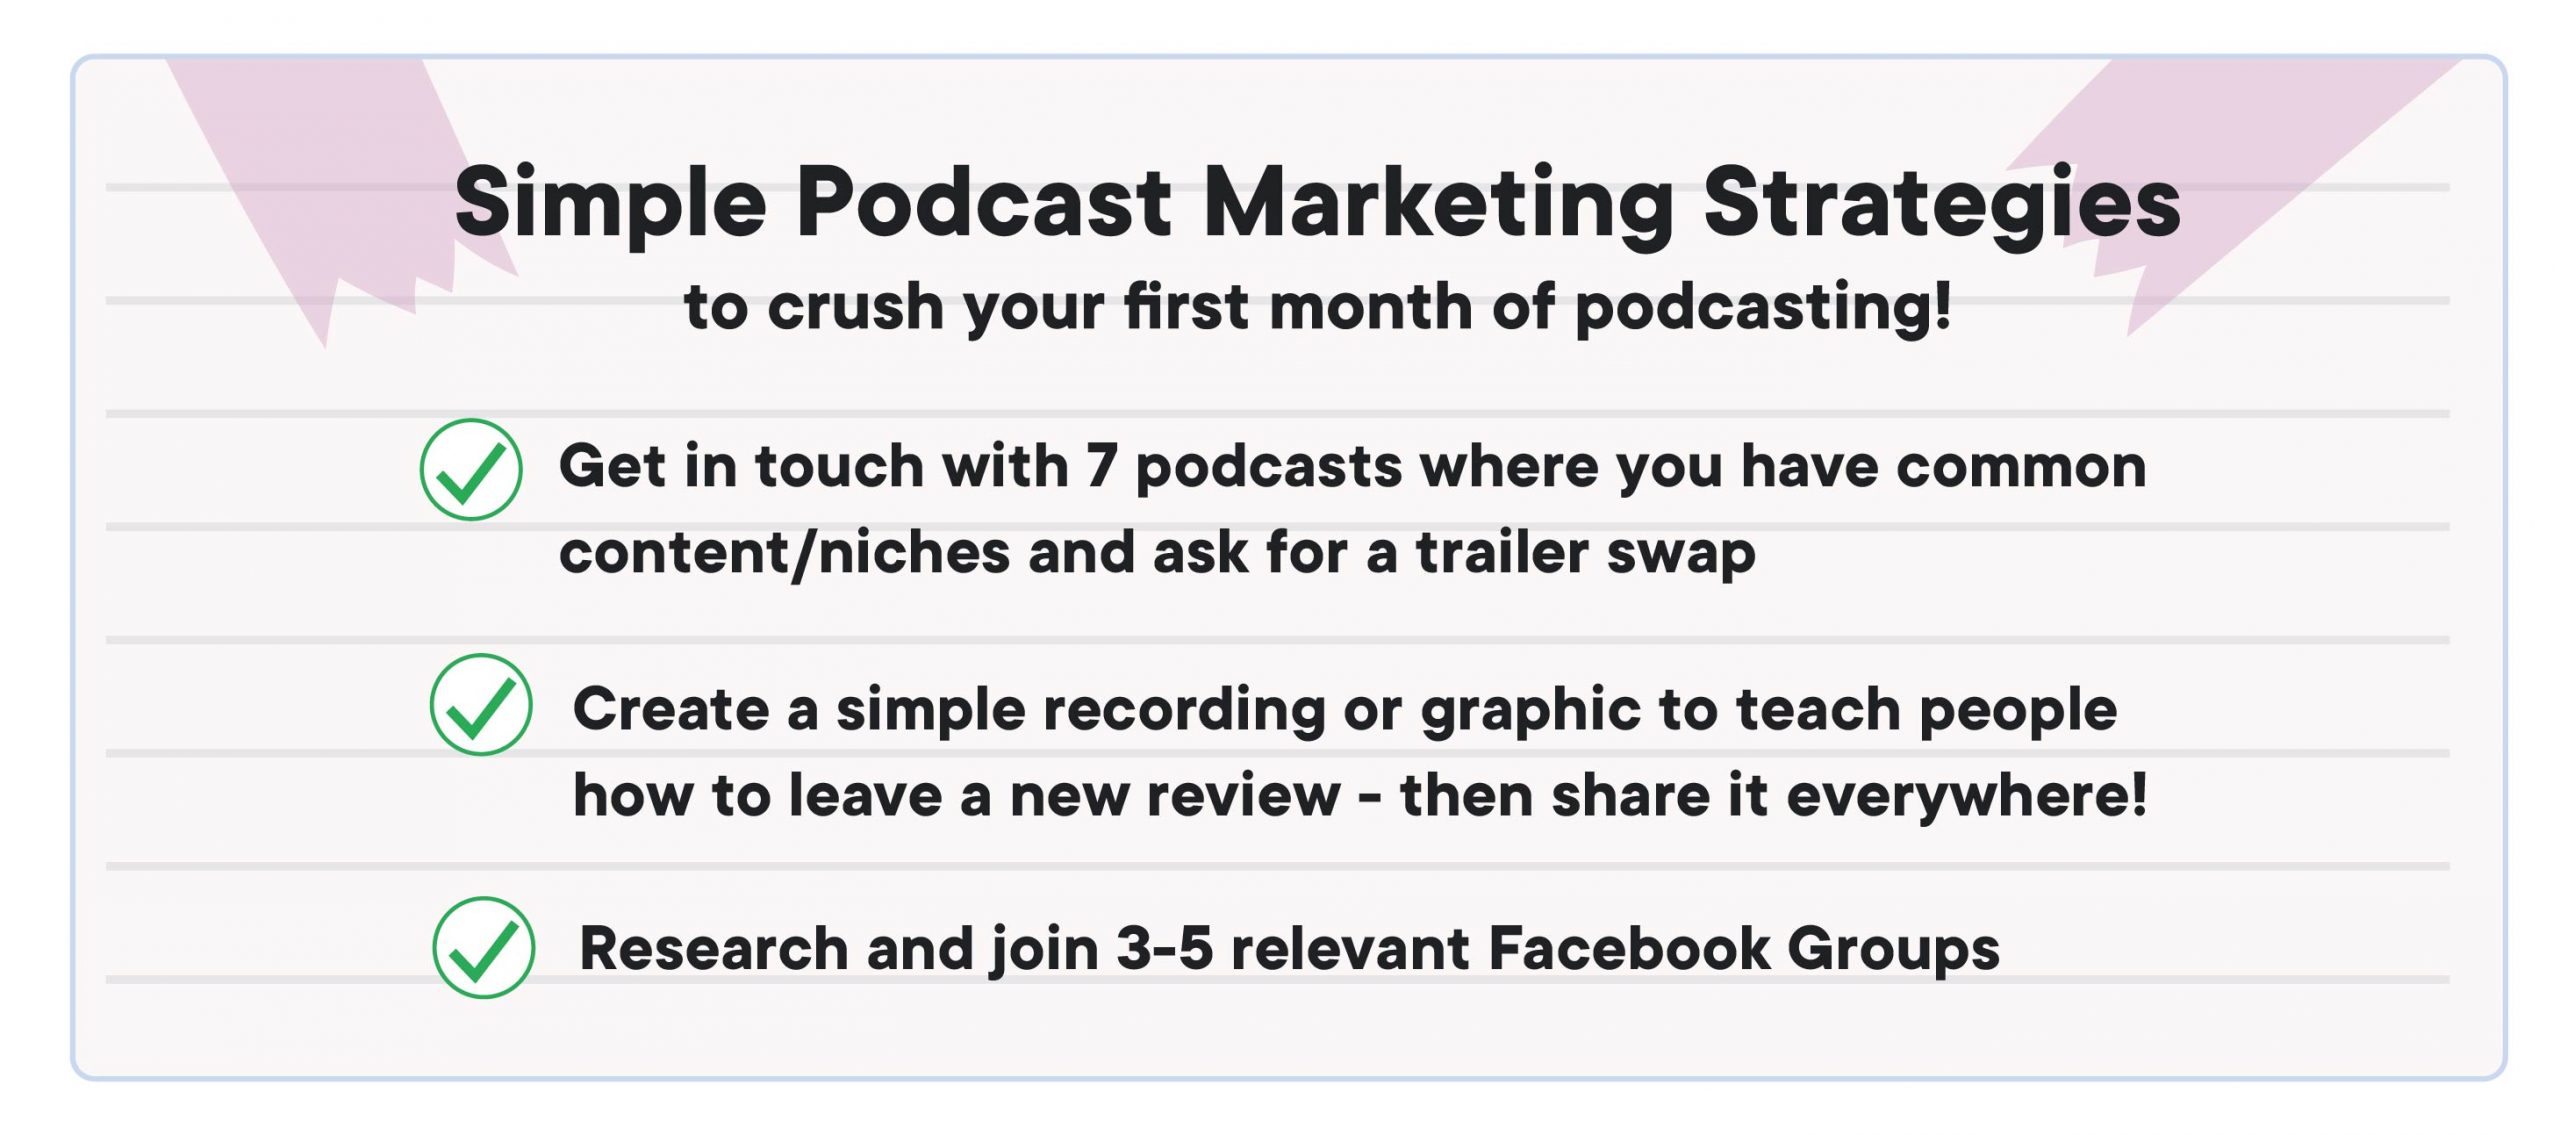 How to start a podcast: best simple marketing strategies for a new podcast. A tick list with 3 bullet points.